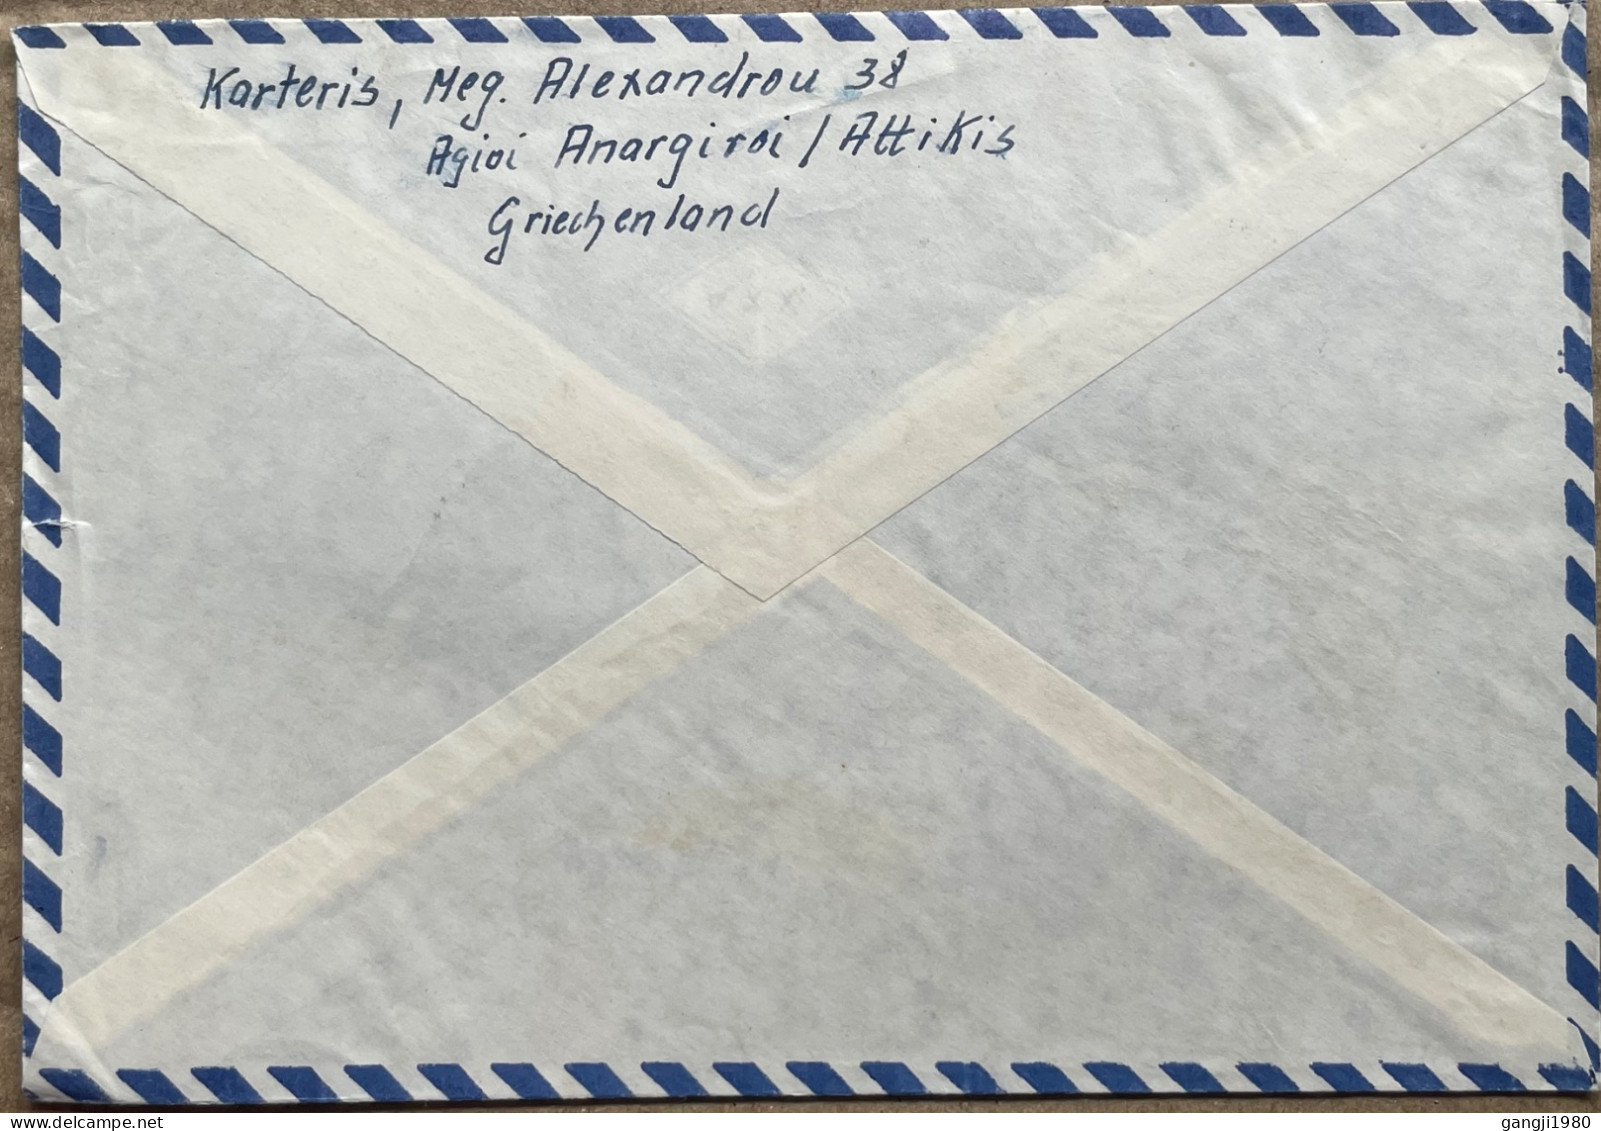 GREECE 1968, COVER USED TO GERMANY, BOXED RETURN FOR PAYMENT OF RE MAILING, 3 DIFF STAMP, RHODE MONUMENT, AIR FORCE AIRC - Covers & Documents